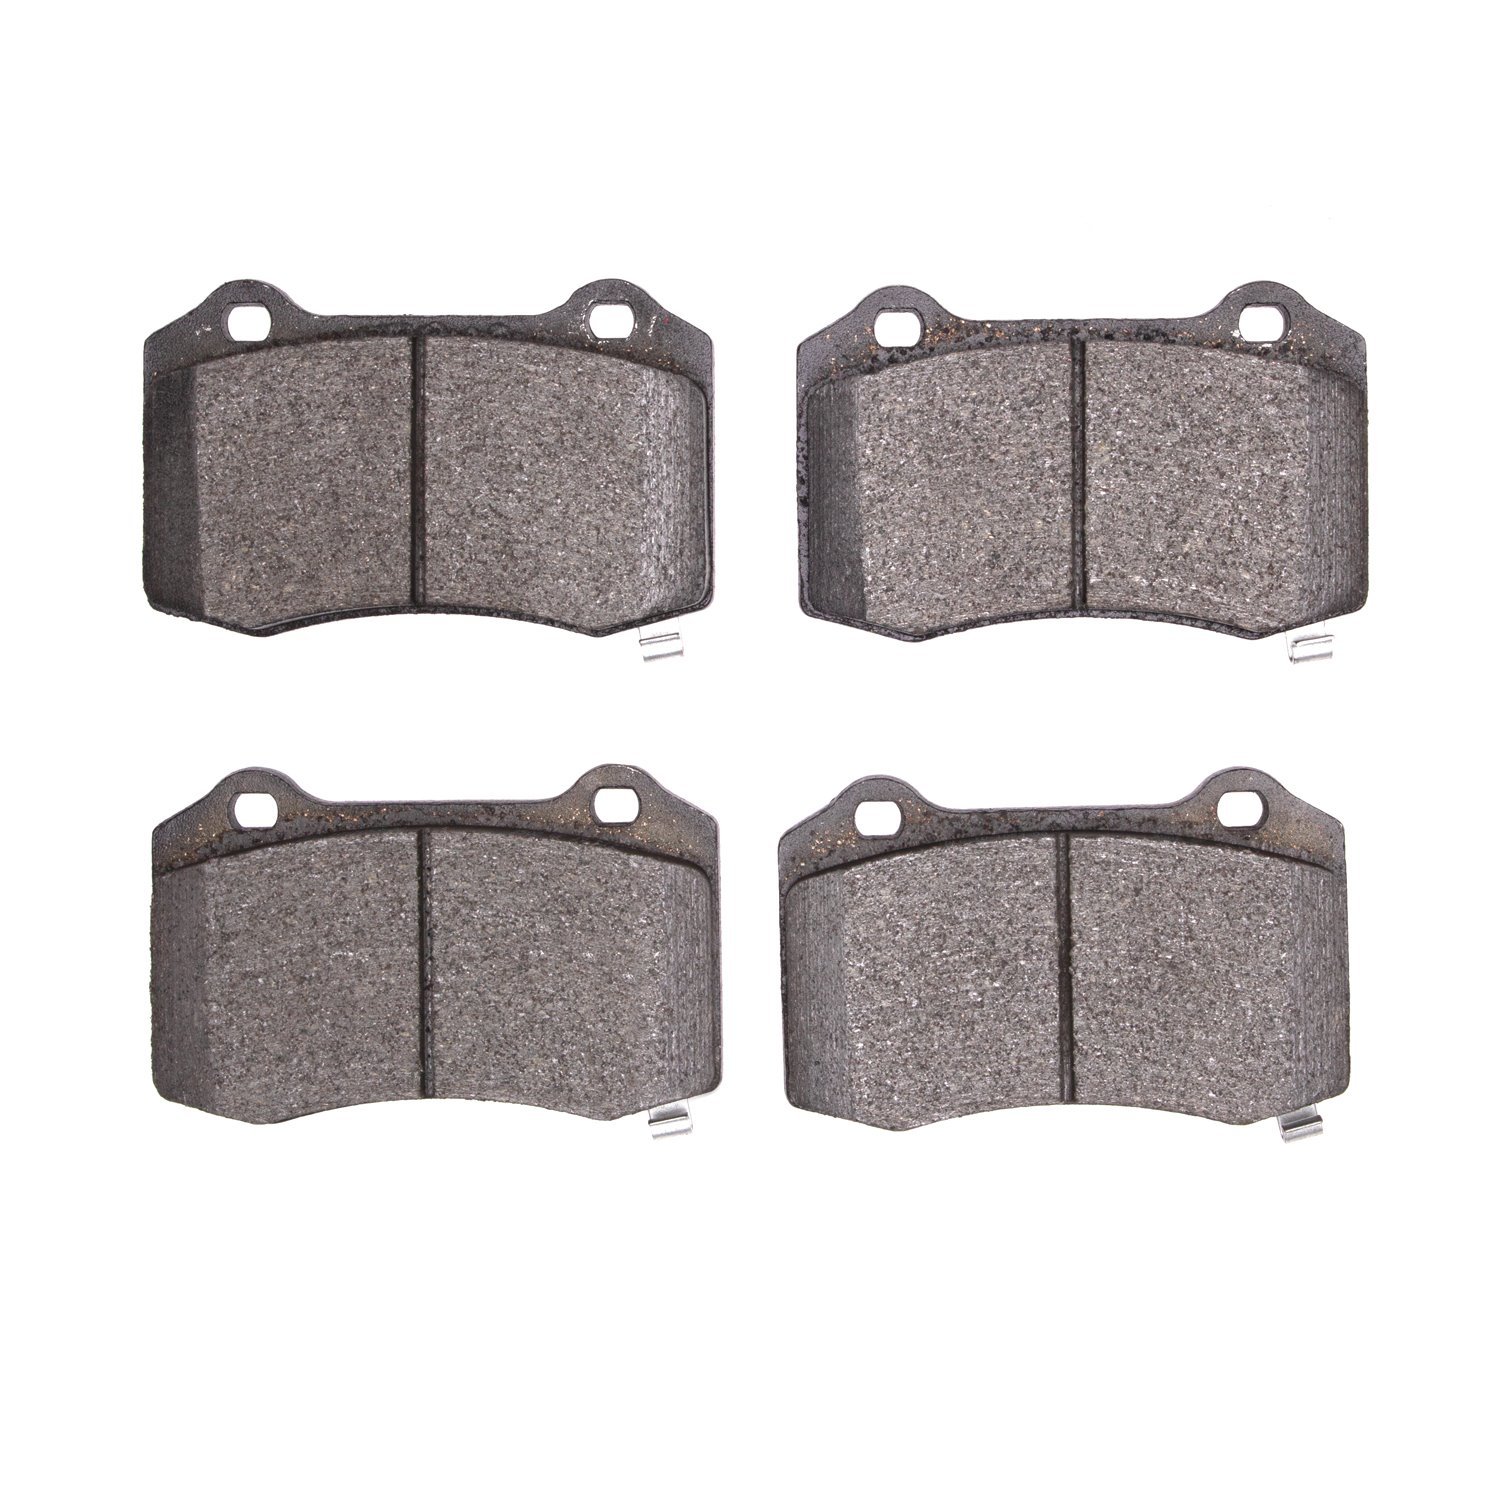 Performance Off-Road/Tow Brake Pads, Fits Select Fits Multiple Makes/Models, Position: Rear